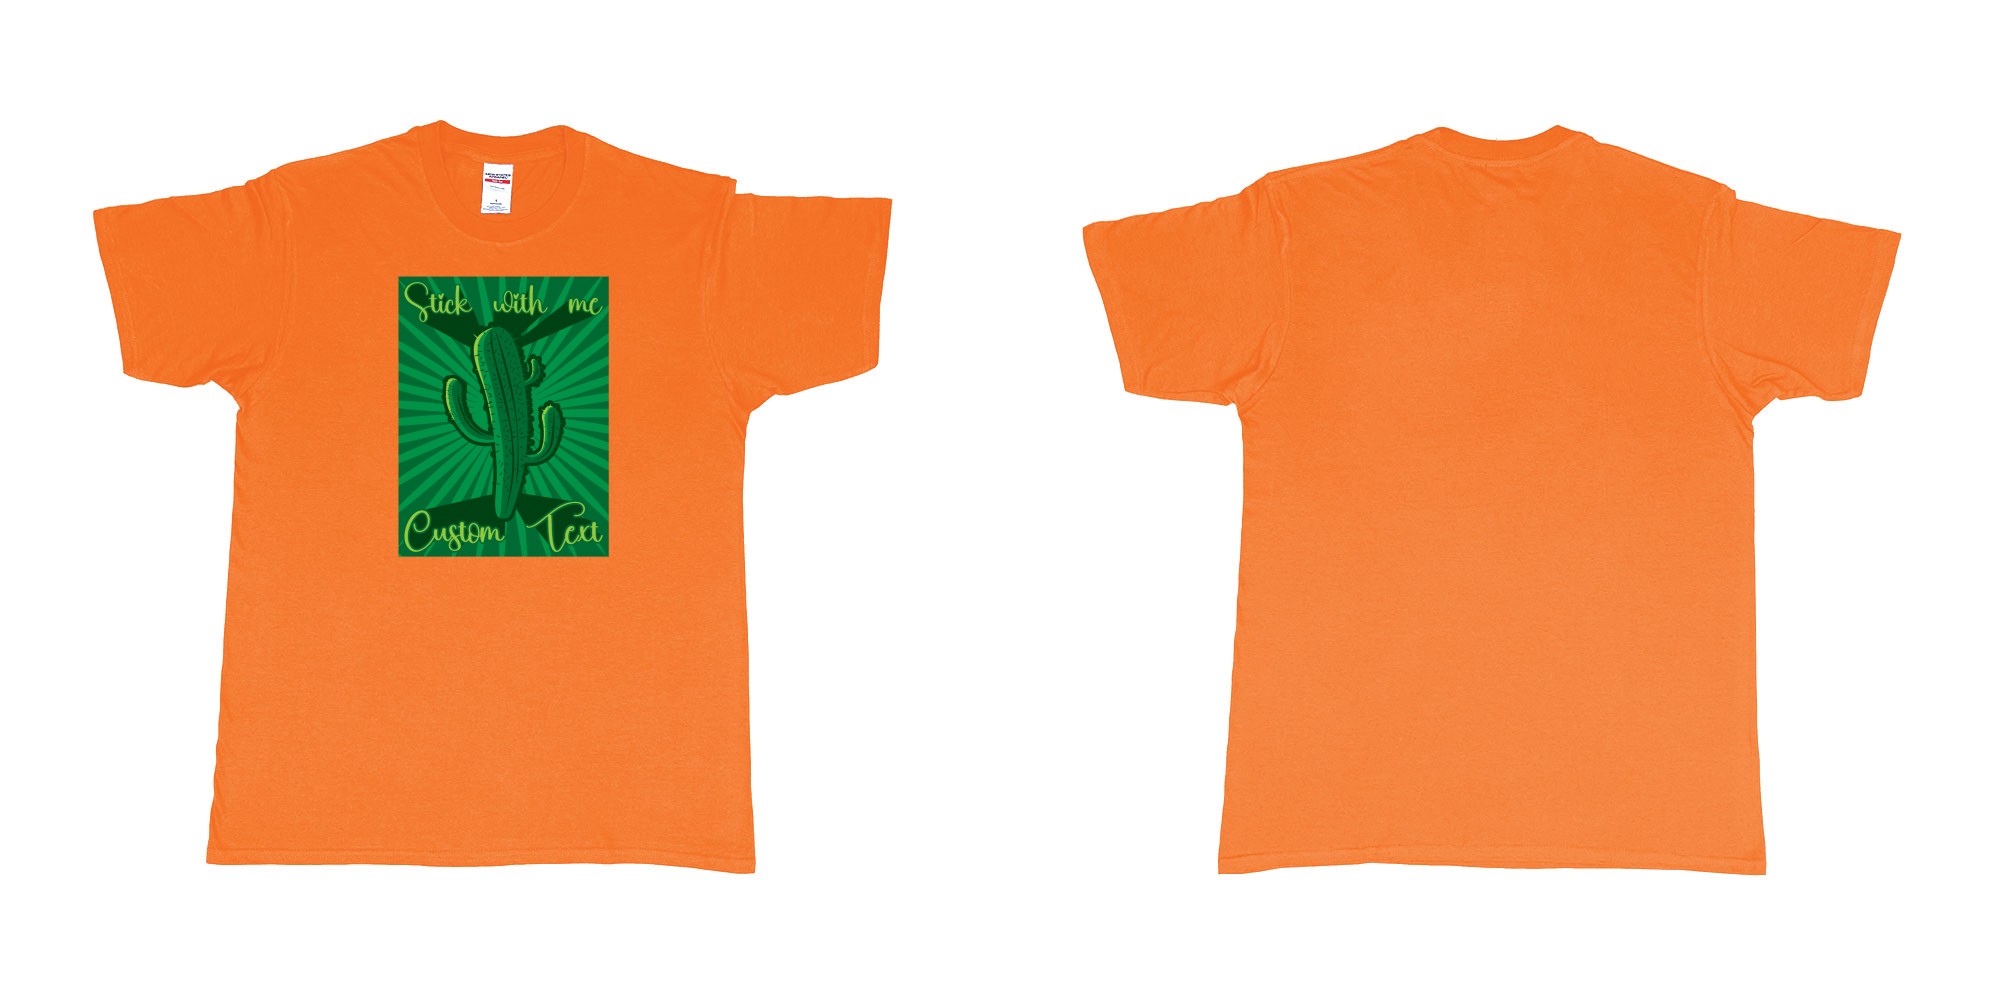 Custom tshirt design cactus stick with me in fabric color orange choice your own text made in Bali by The Pirate Way